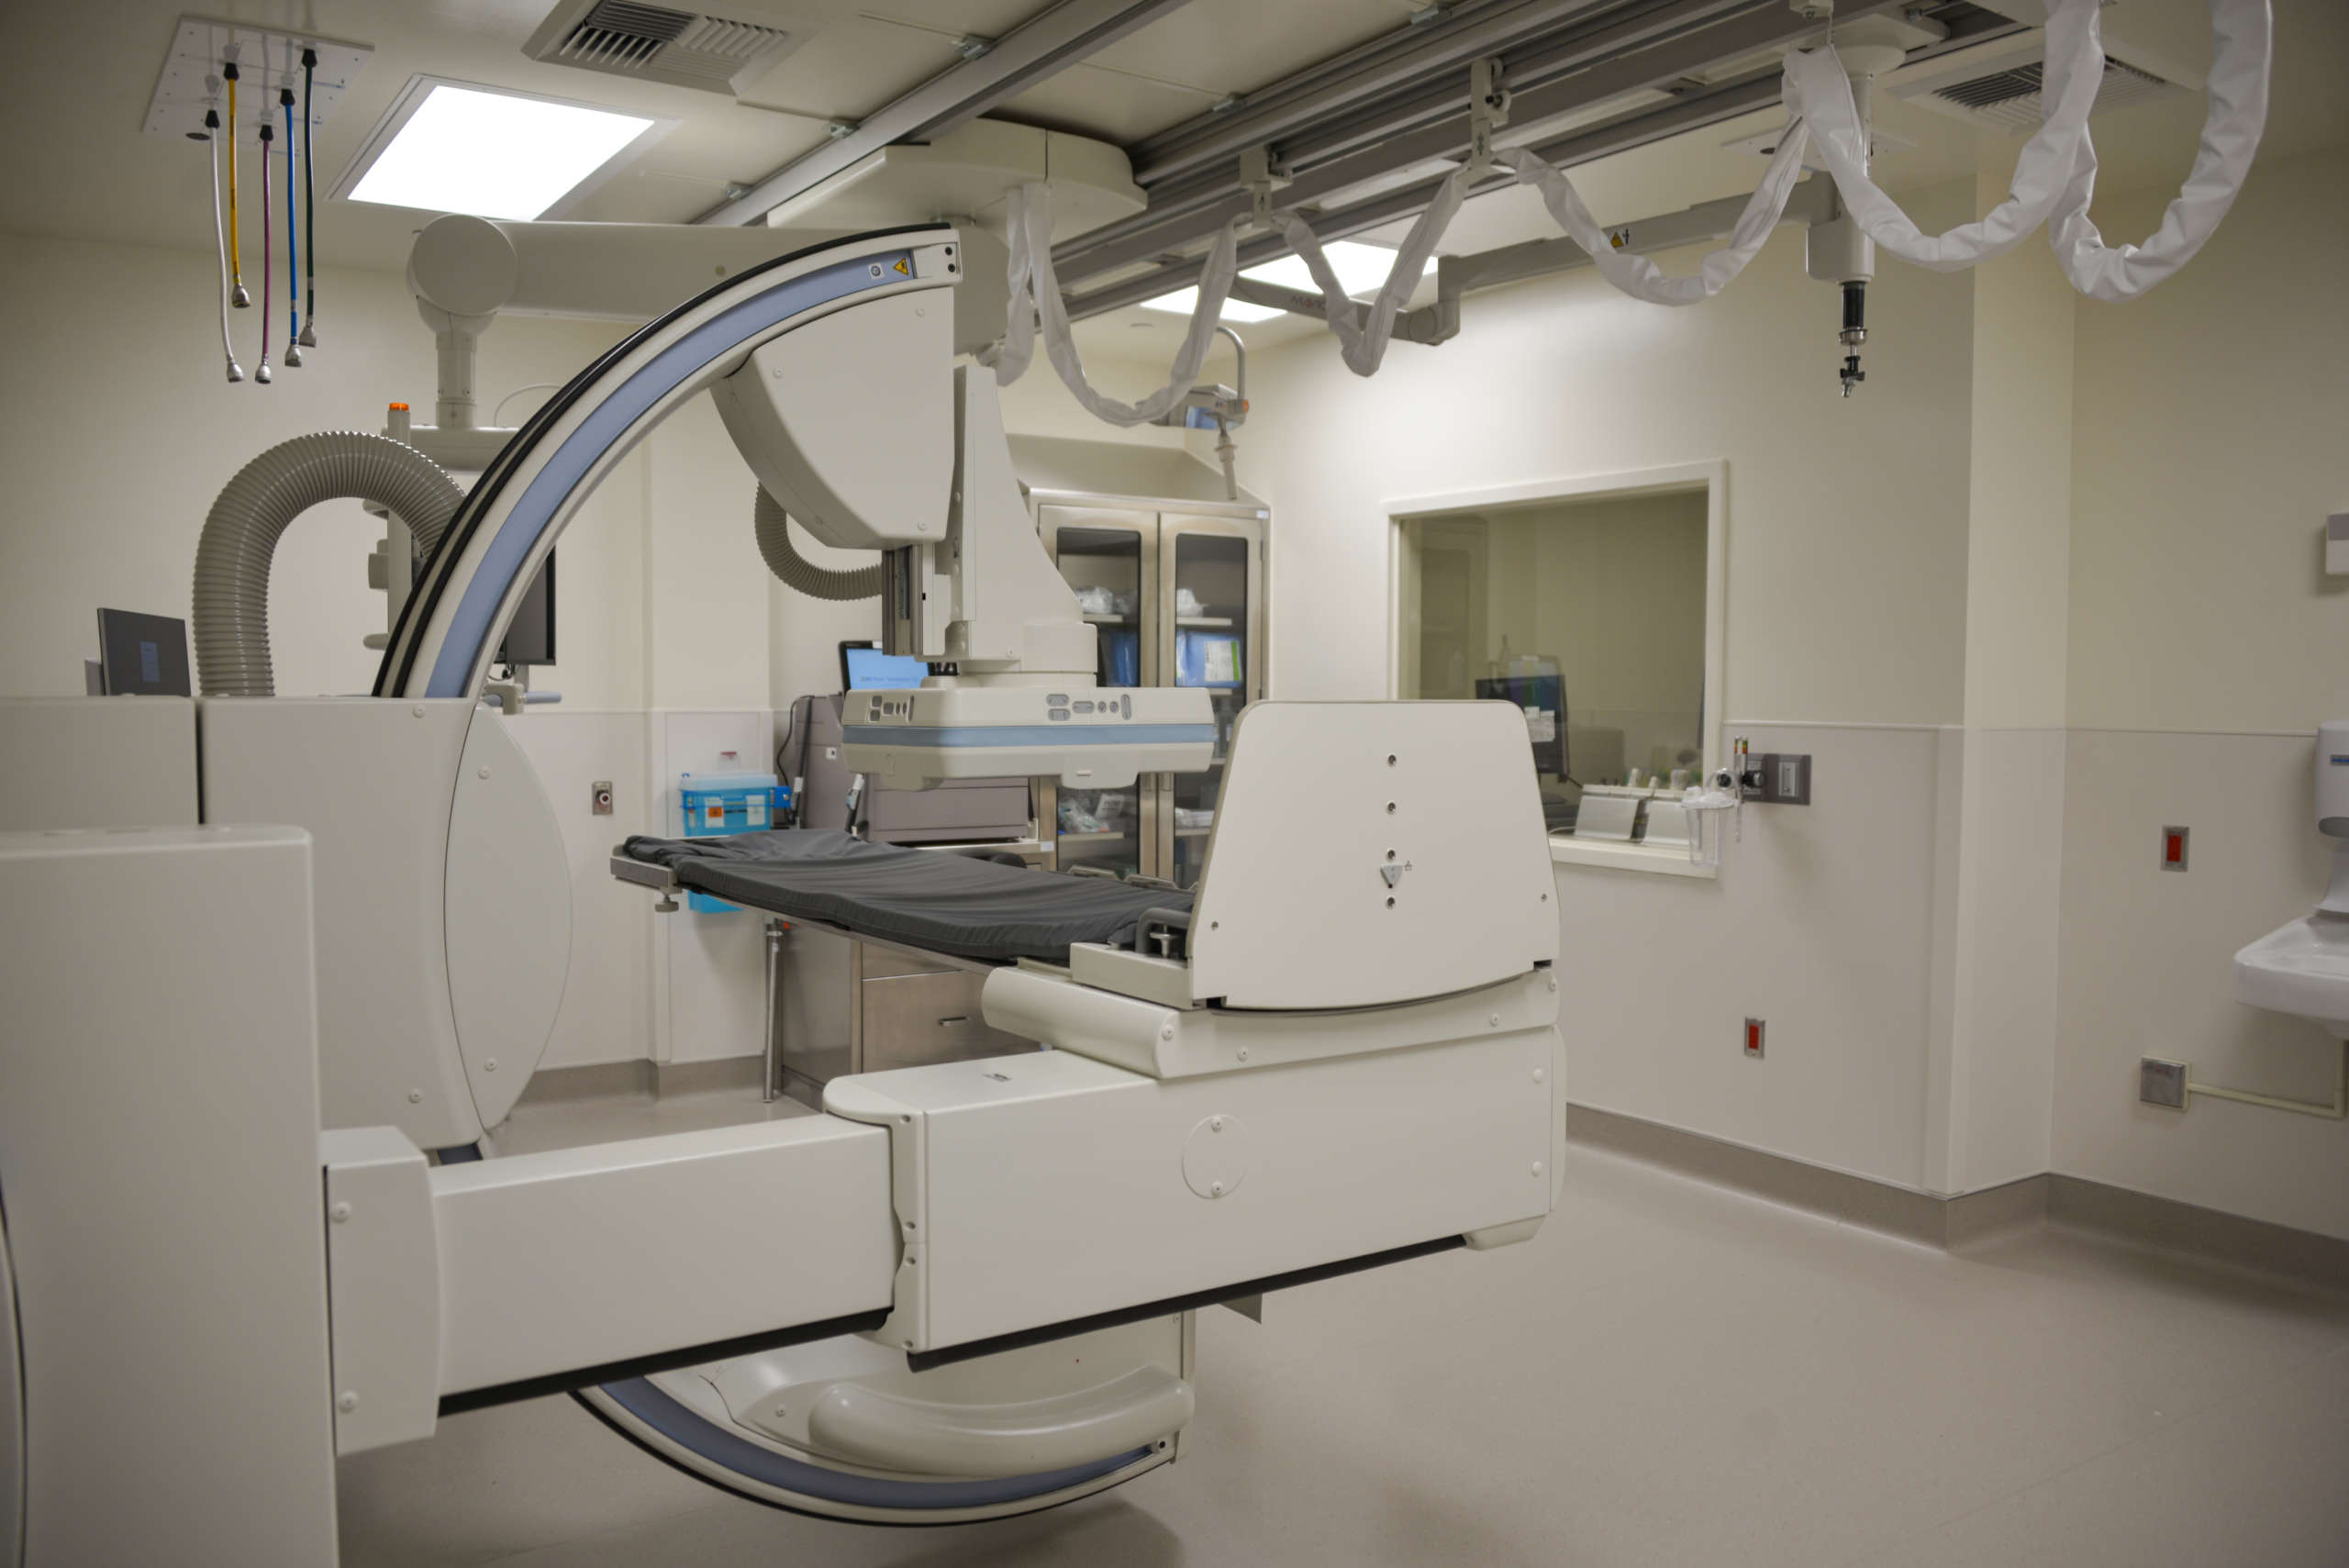 Patient room with medical equipment at the UC Davis Health Pulmonary & GI Remodel